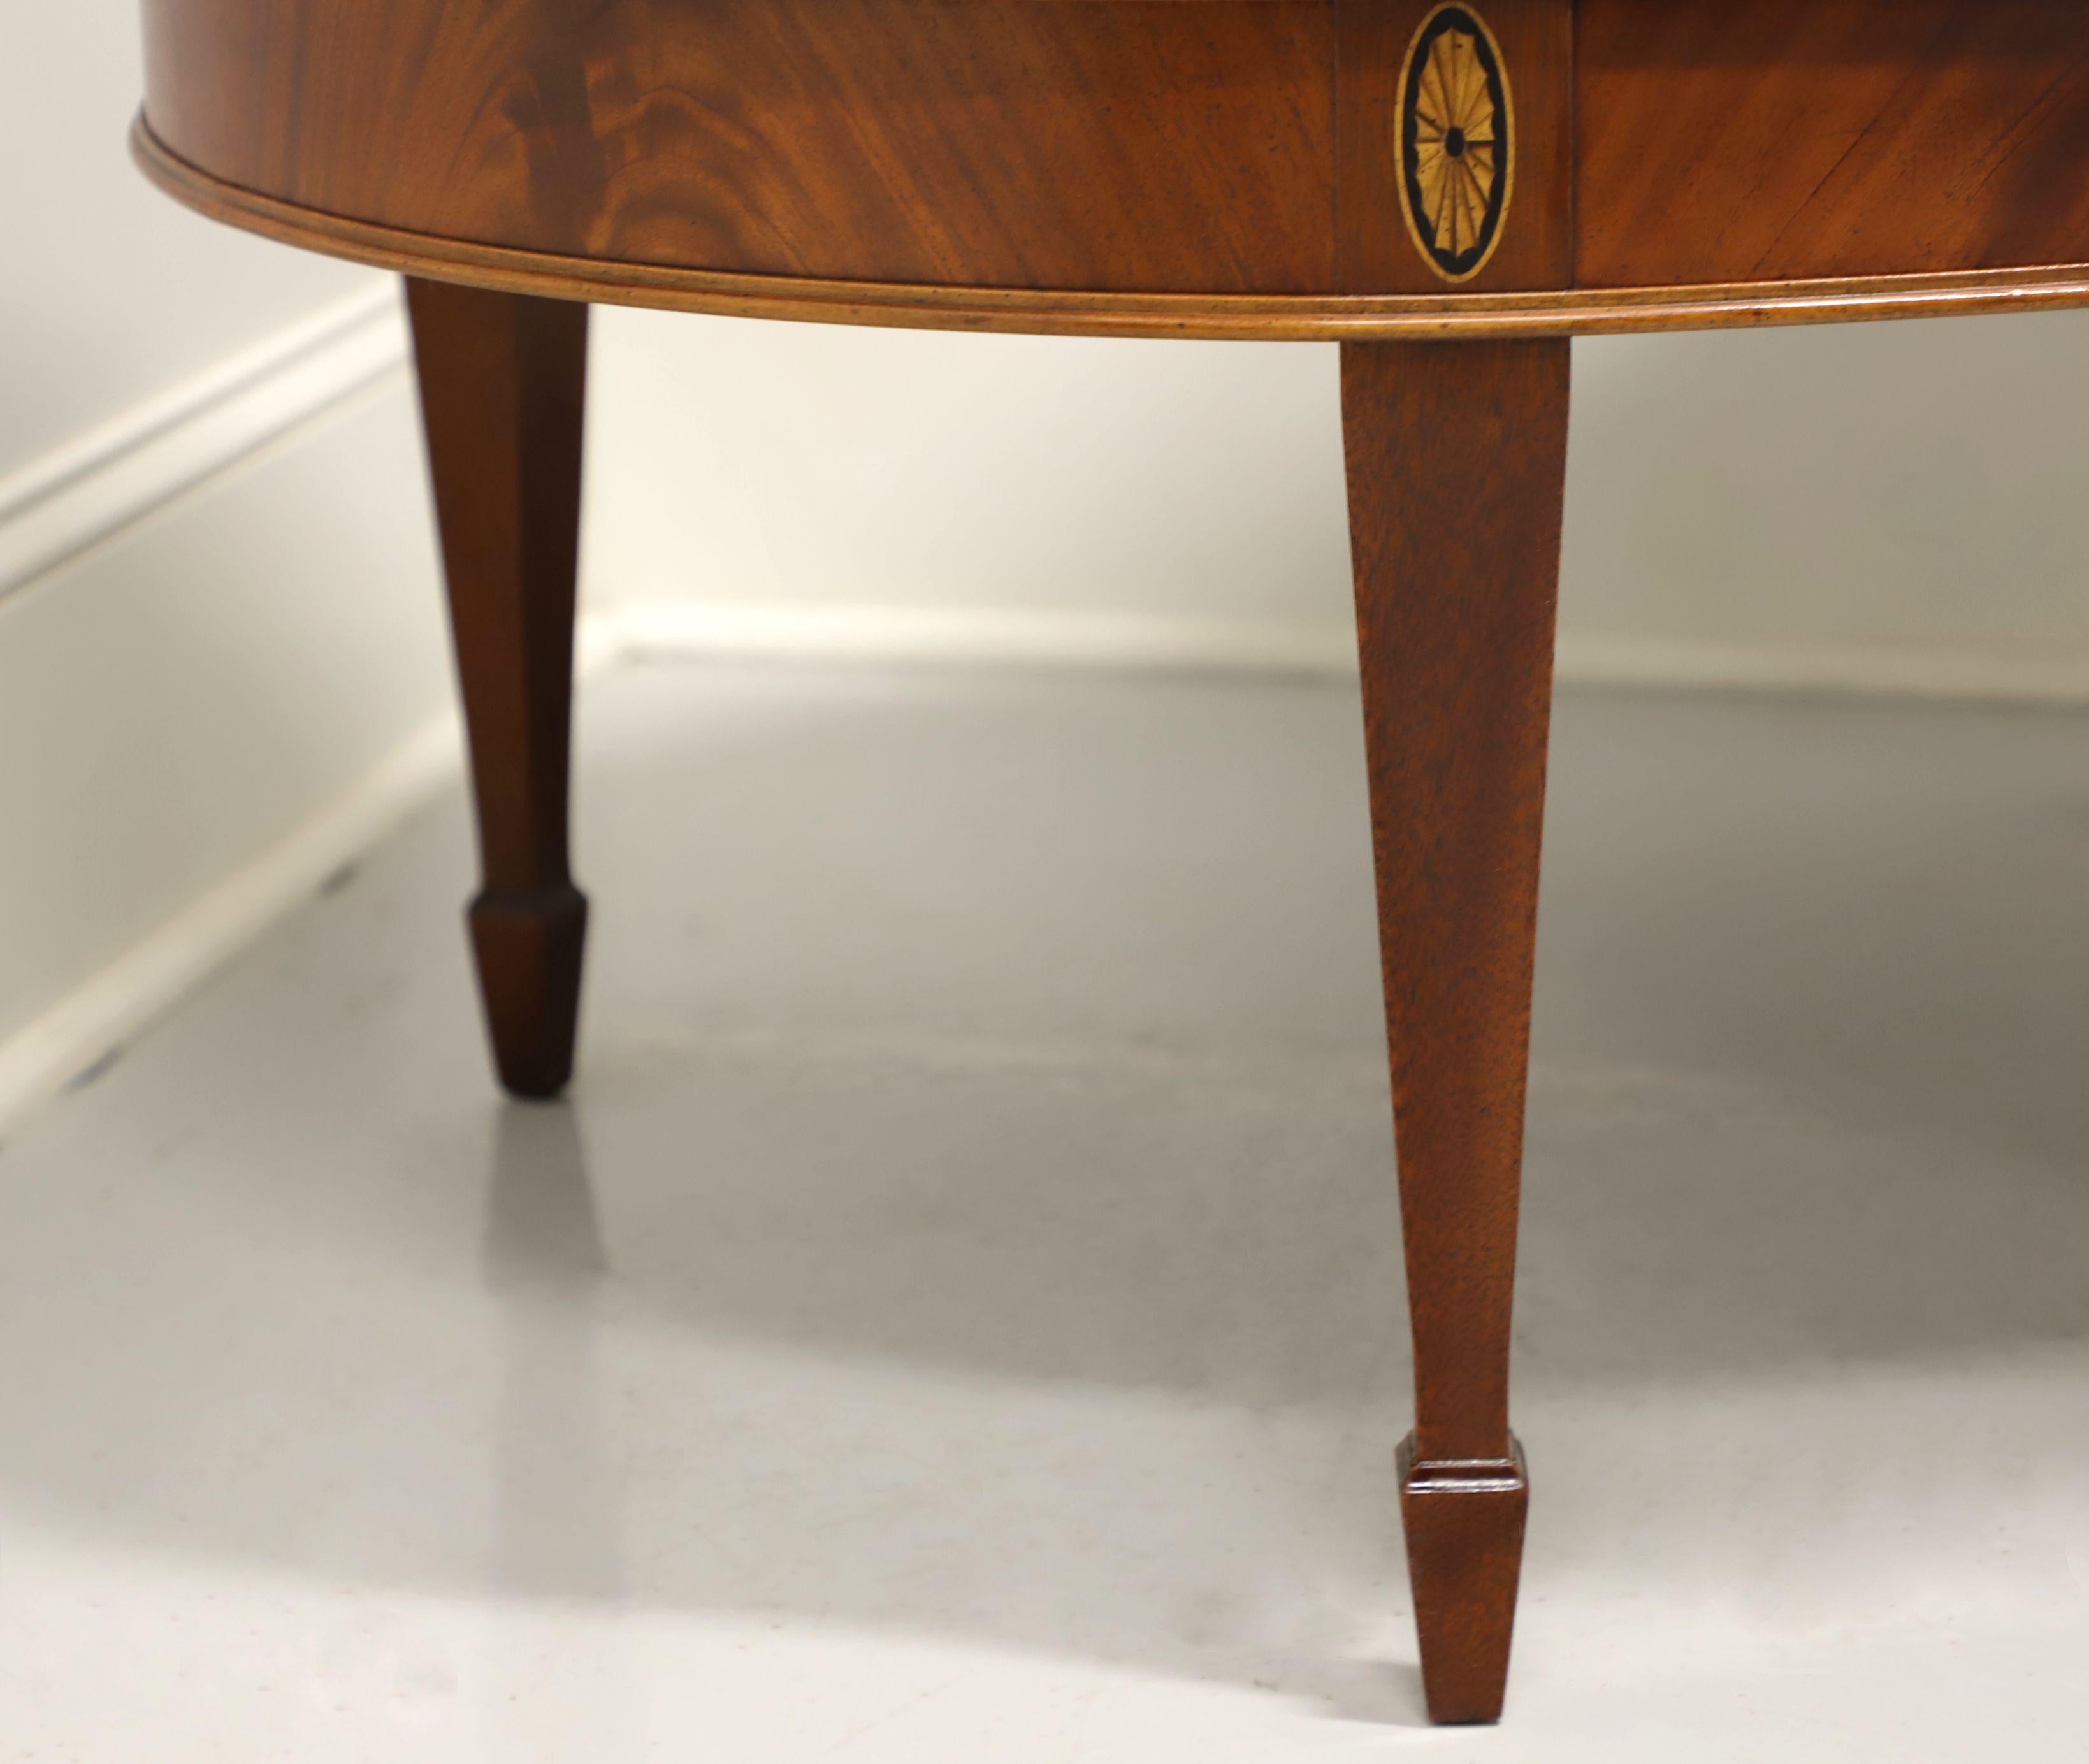 20th Century HEKMAN Copley Place Inlaid Flame Mahogany Coffee Table